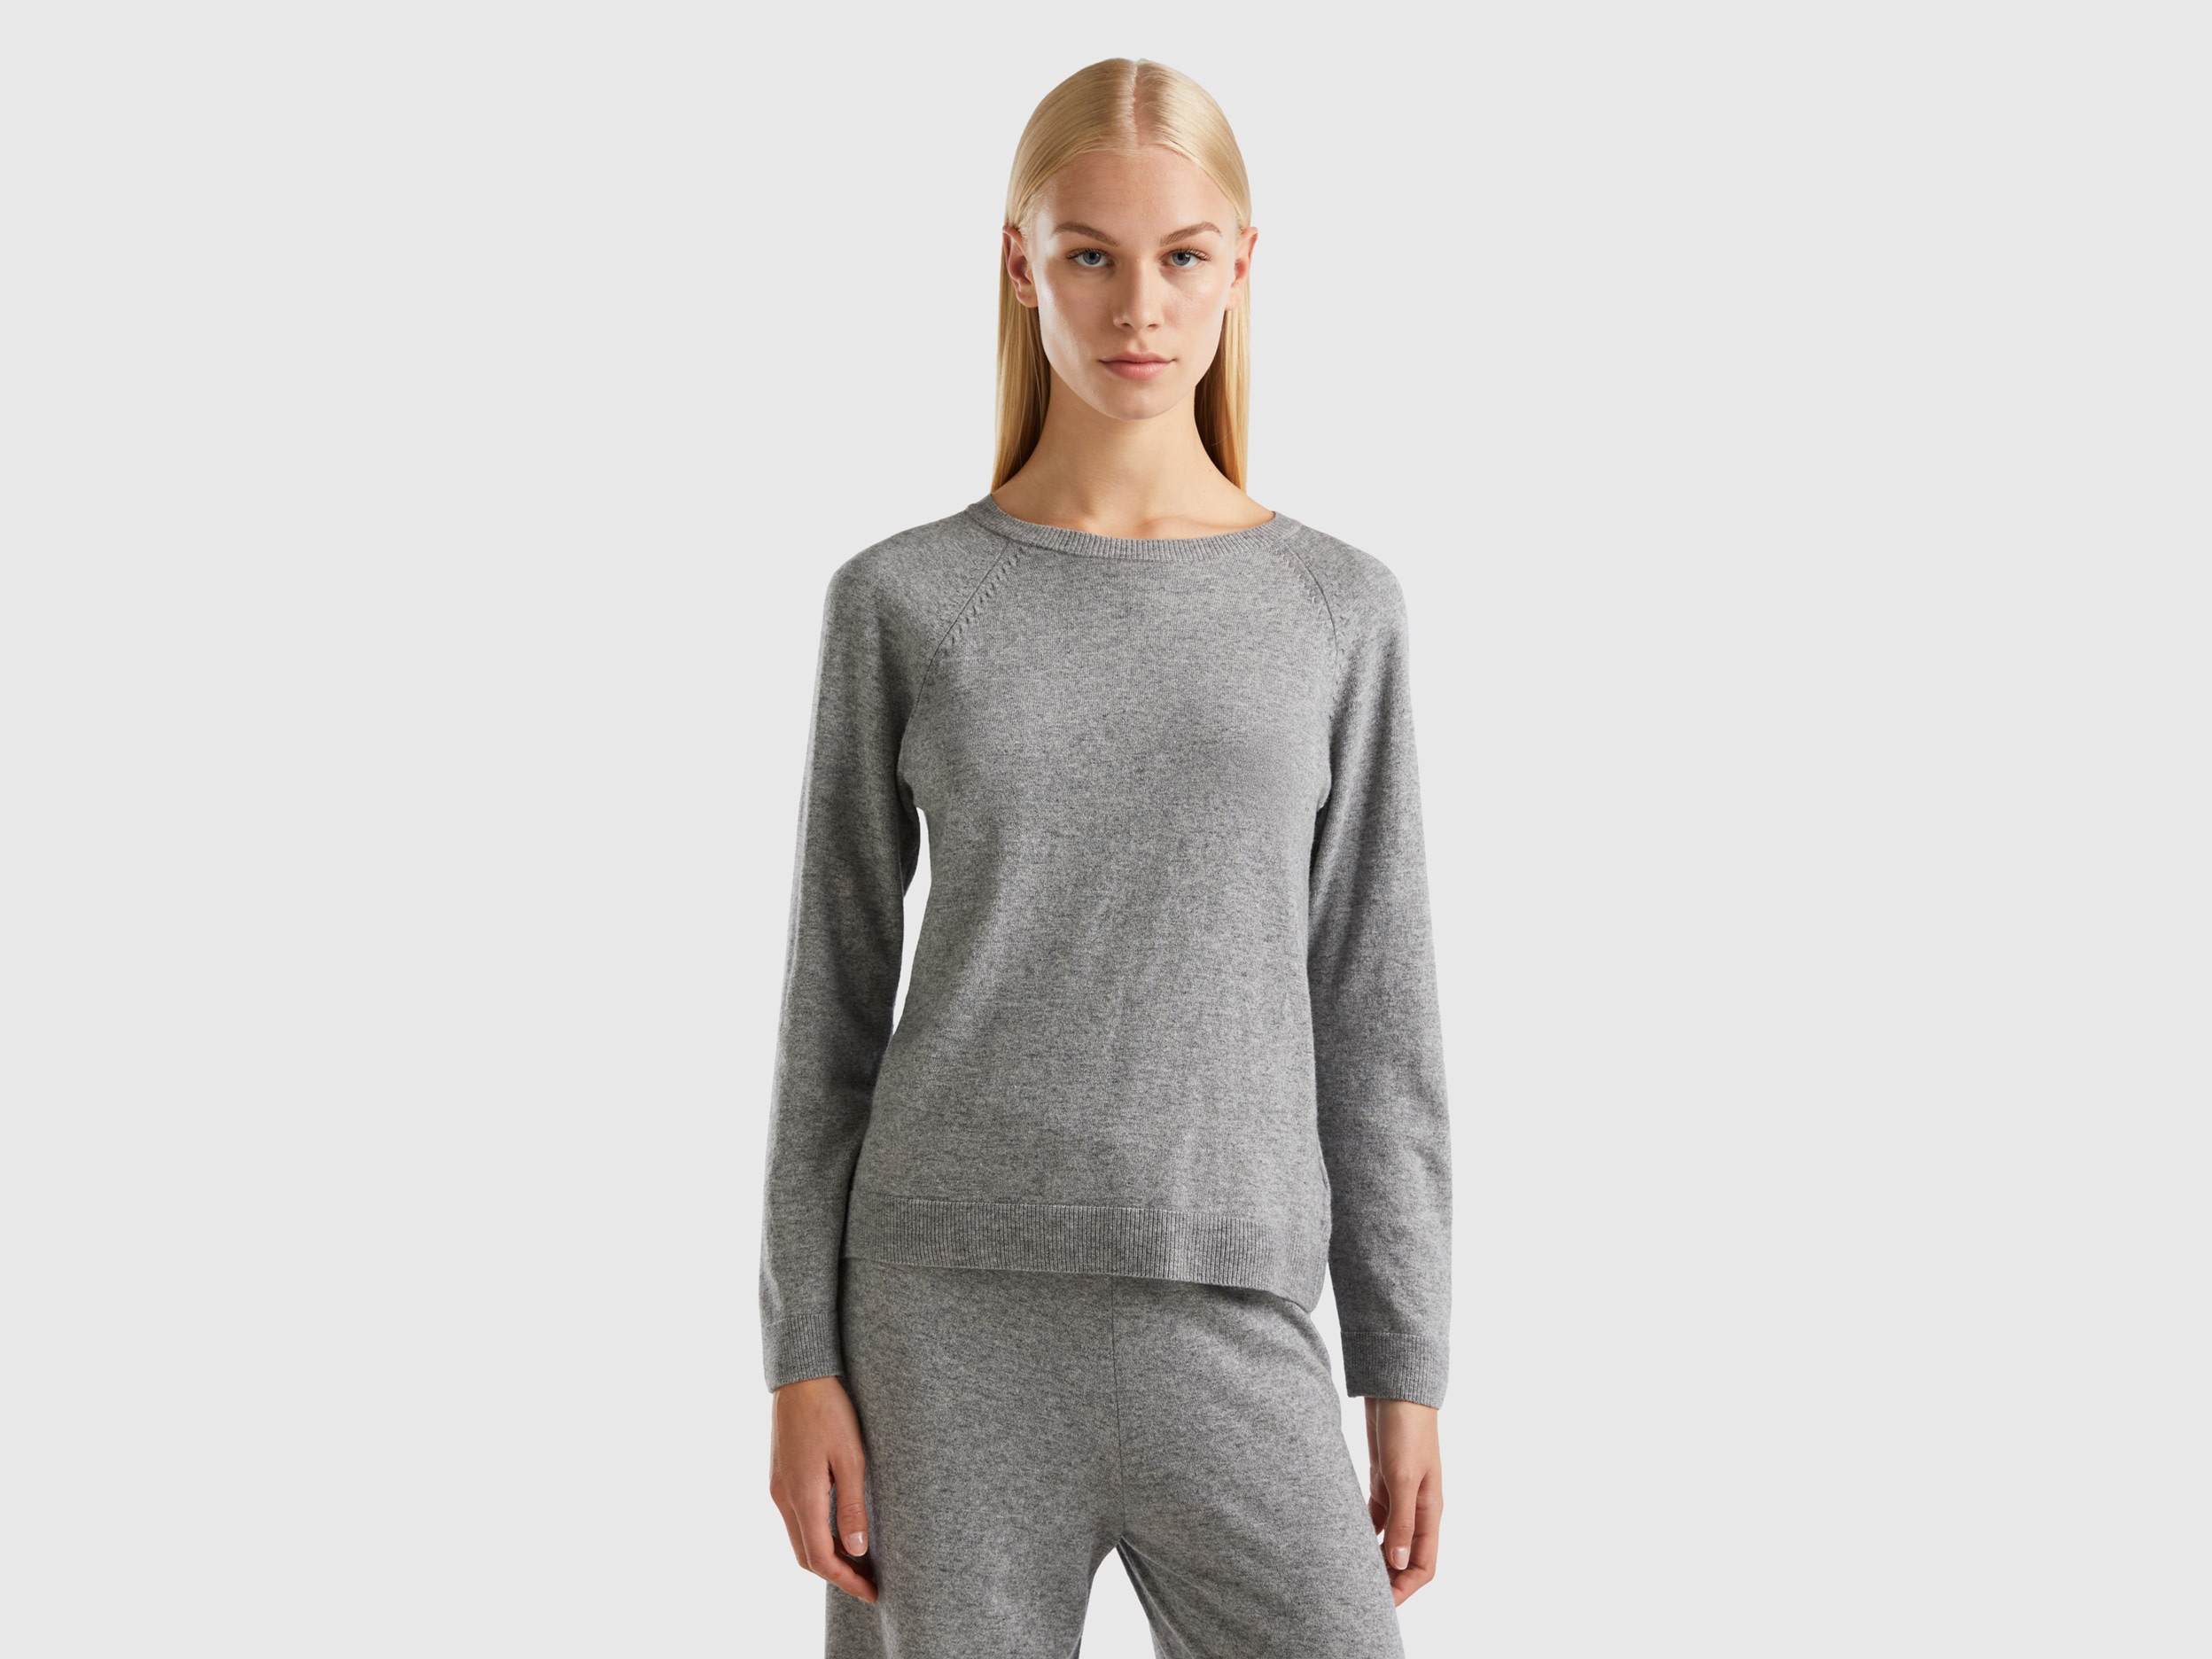 Benetton, Gray Crew Neck Sweater In Cashmere And Wool Blend, size XL, Light Gray, Women